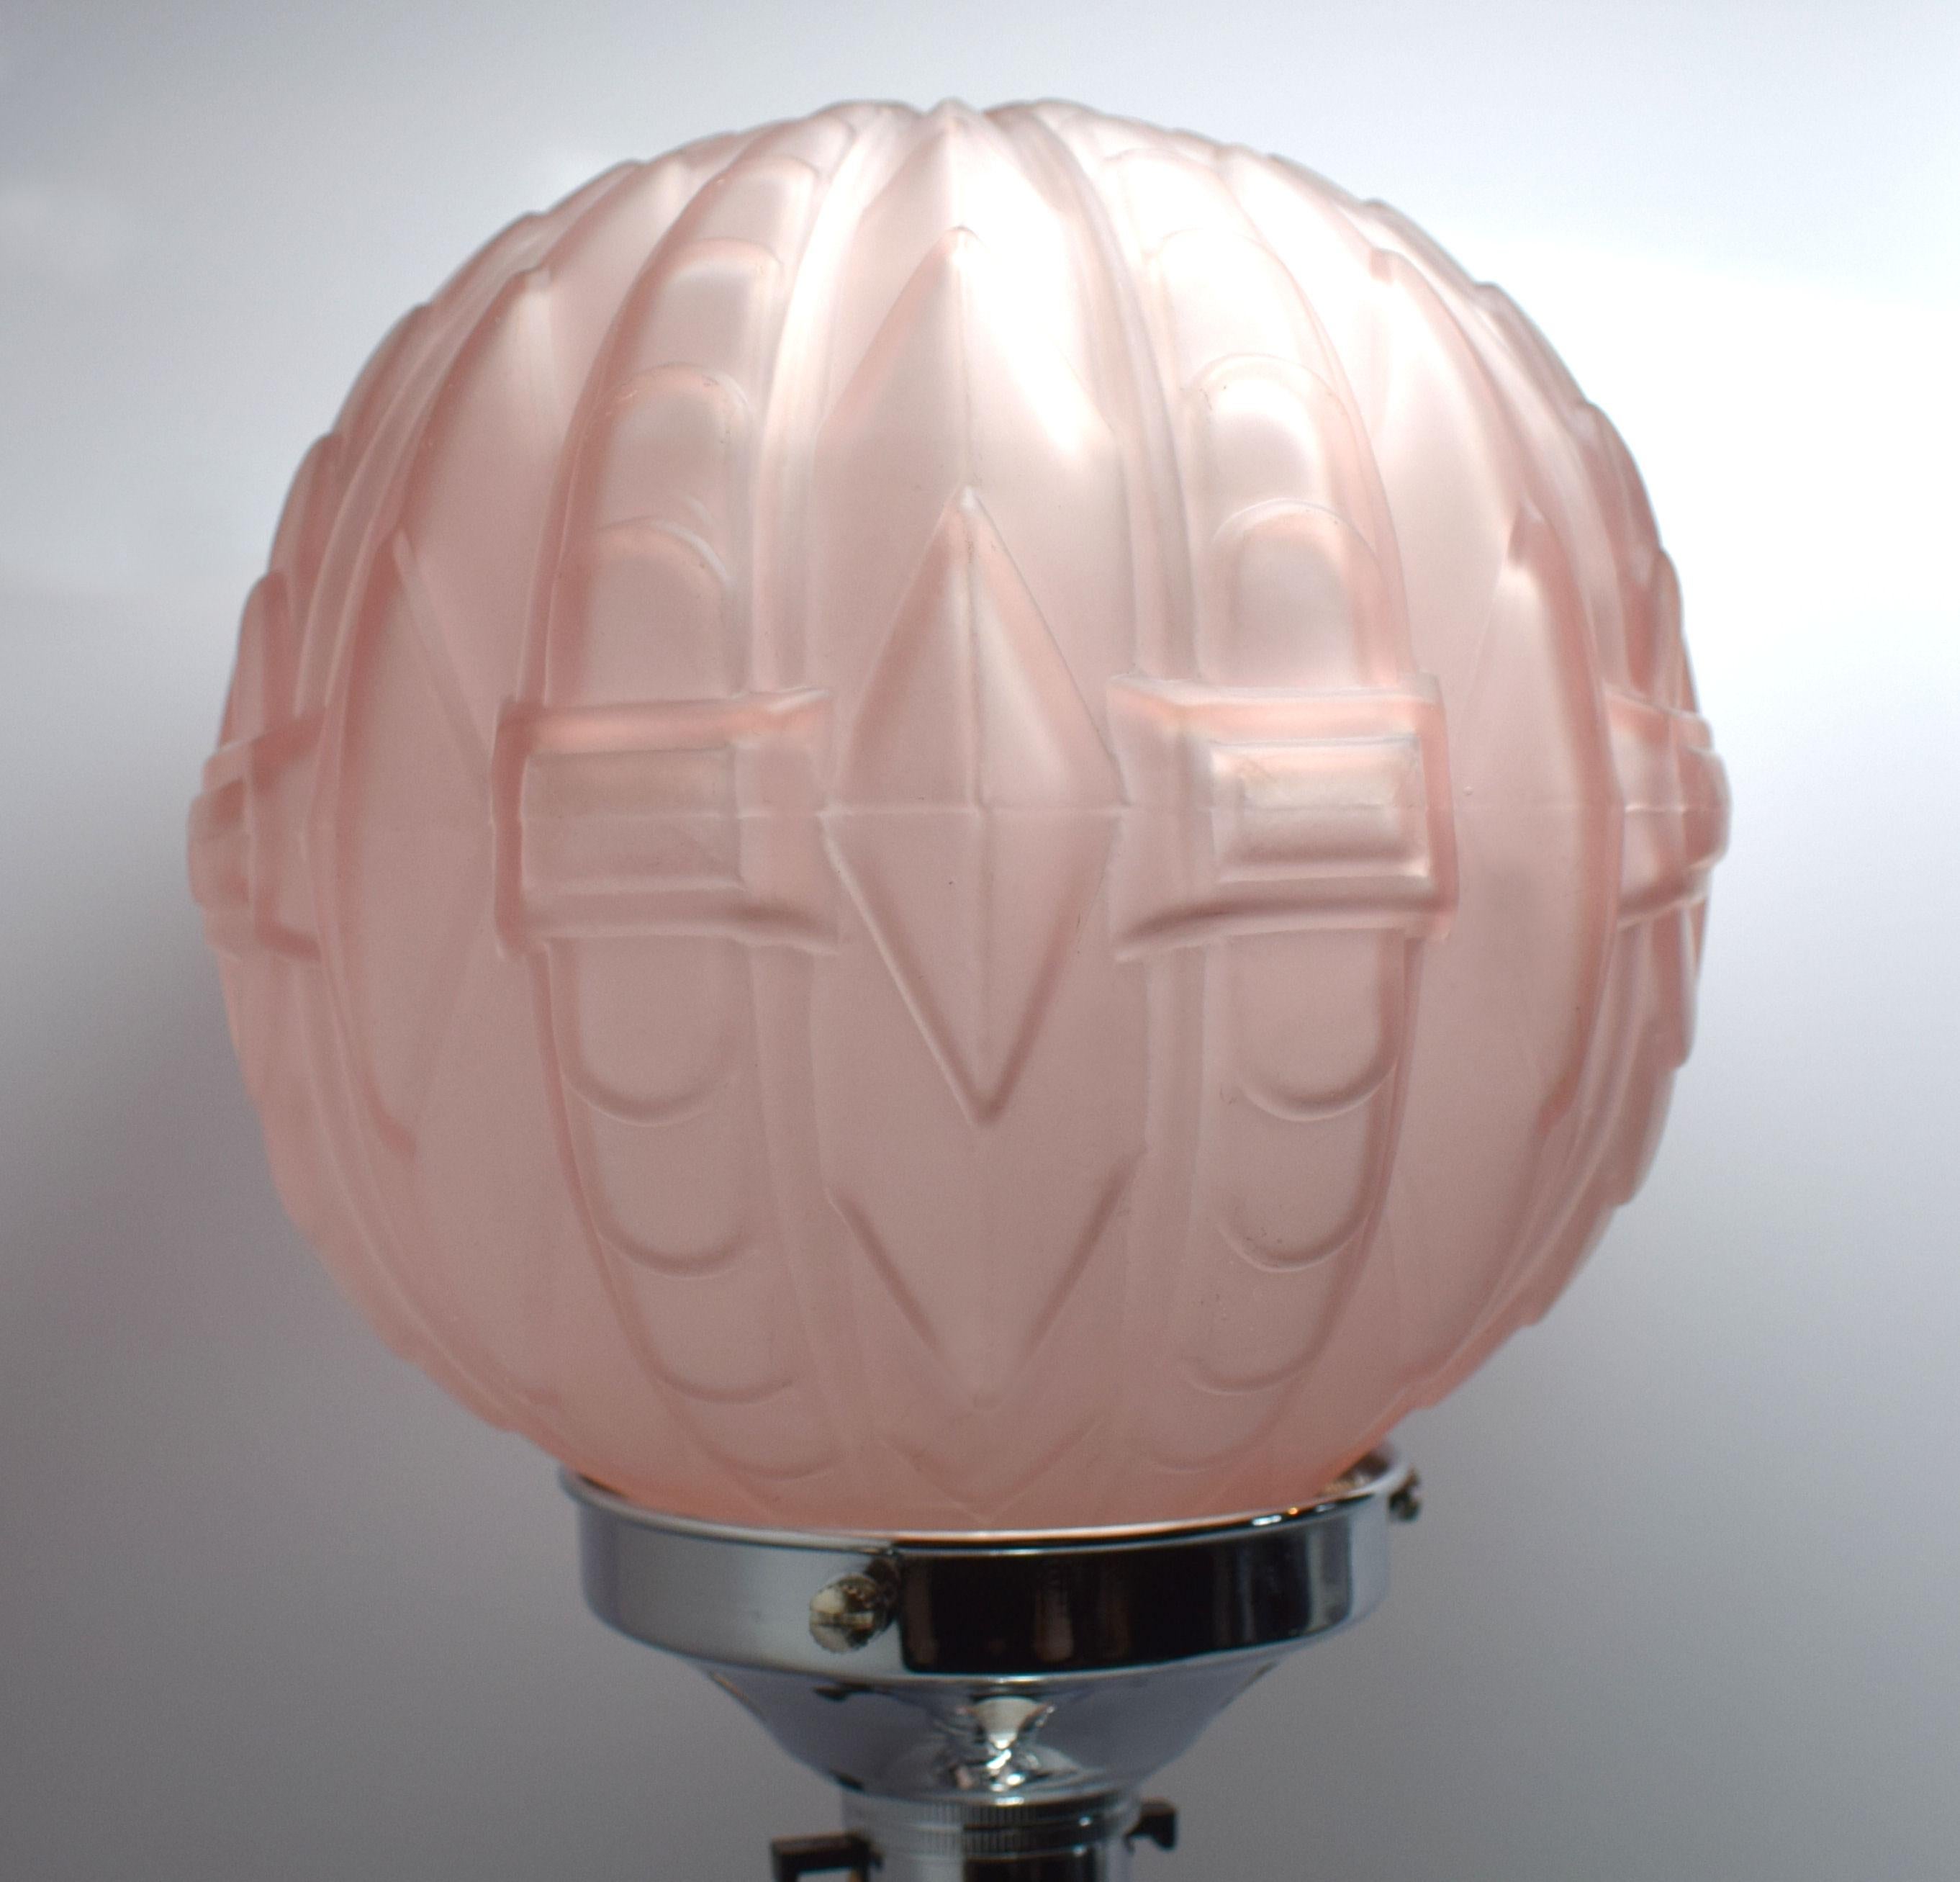 Original Art Deco lamp dating to the 1930s. This wonderful lamp features a chrome column, base and gallery with a beautiful soft pink embossed glass shade to finish this lamp off perfectly. Condition is excellent, the chrome is bright and crisp,